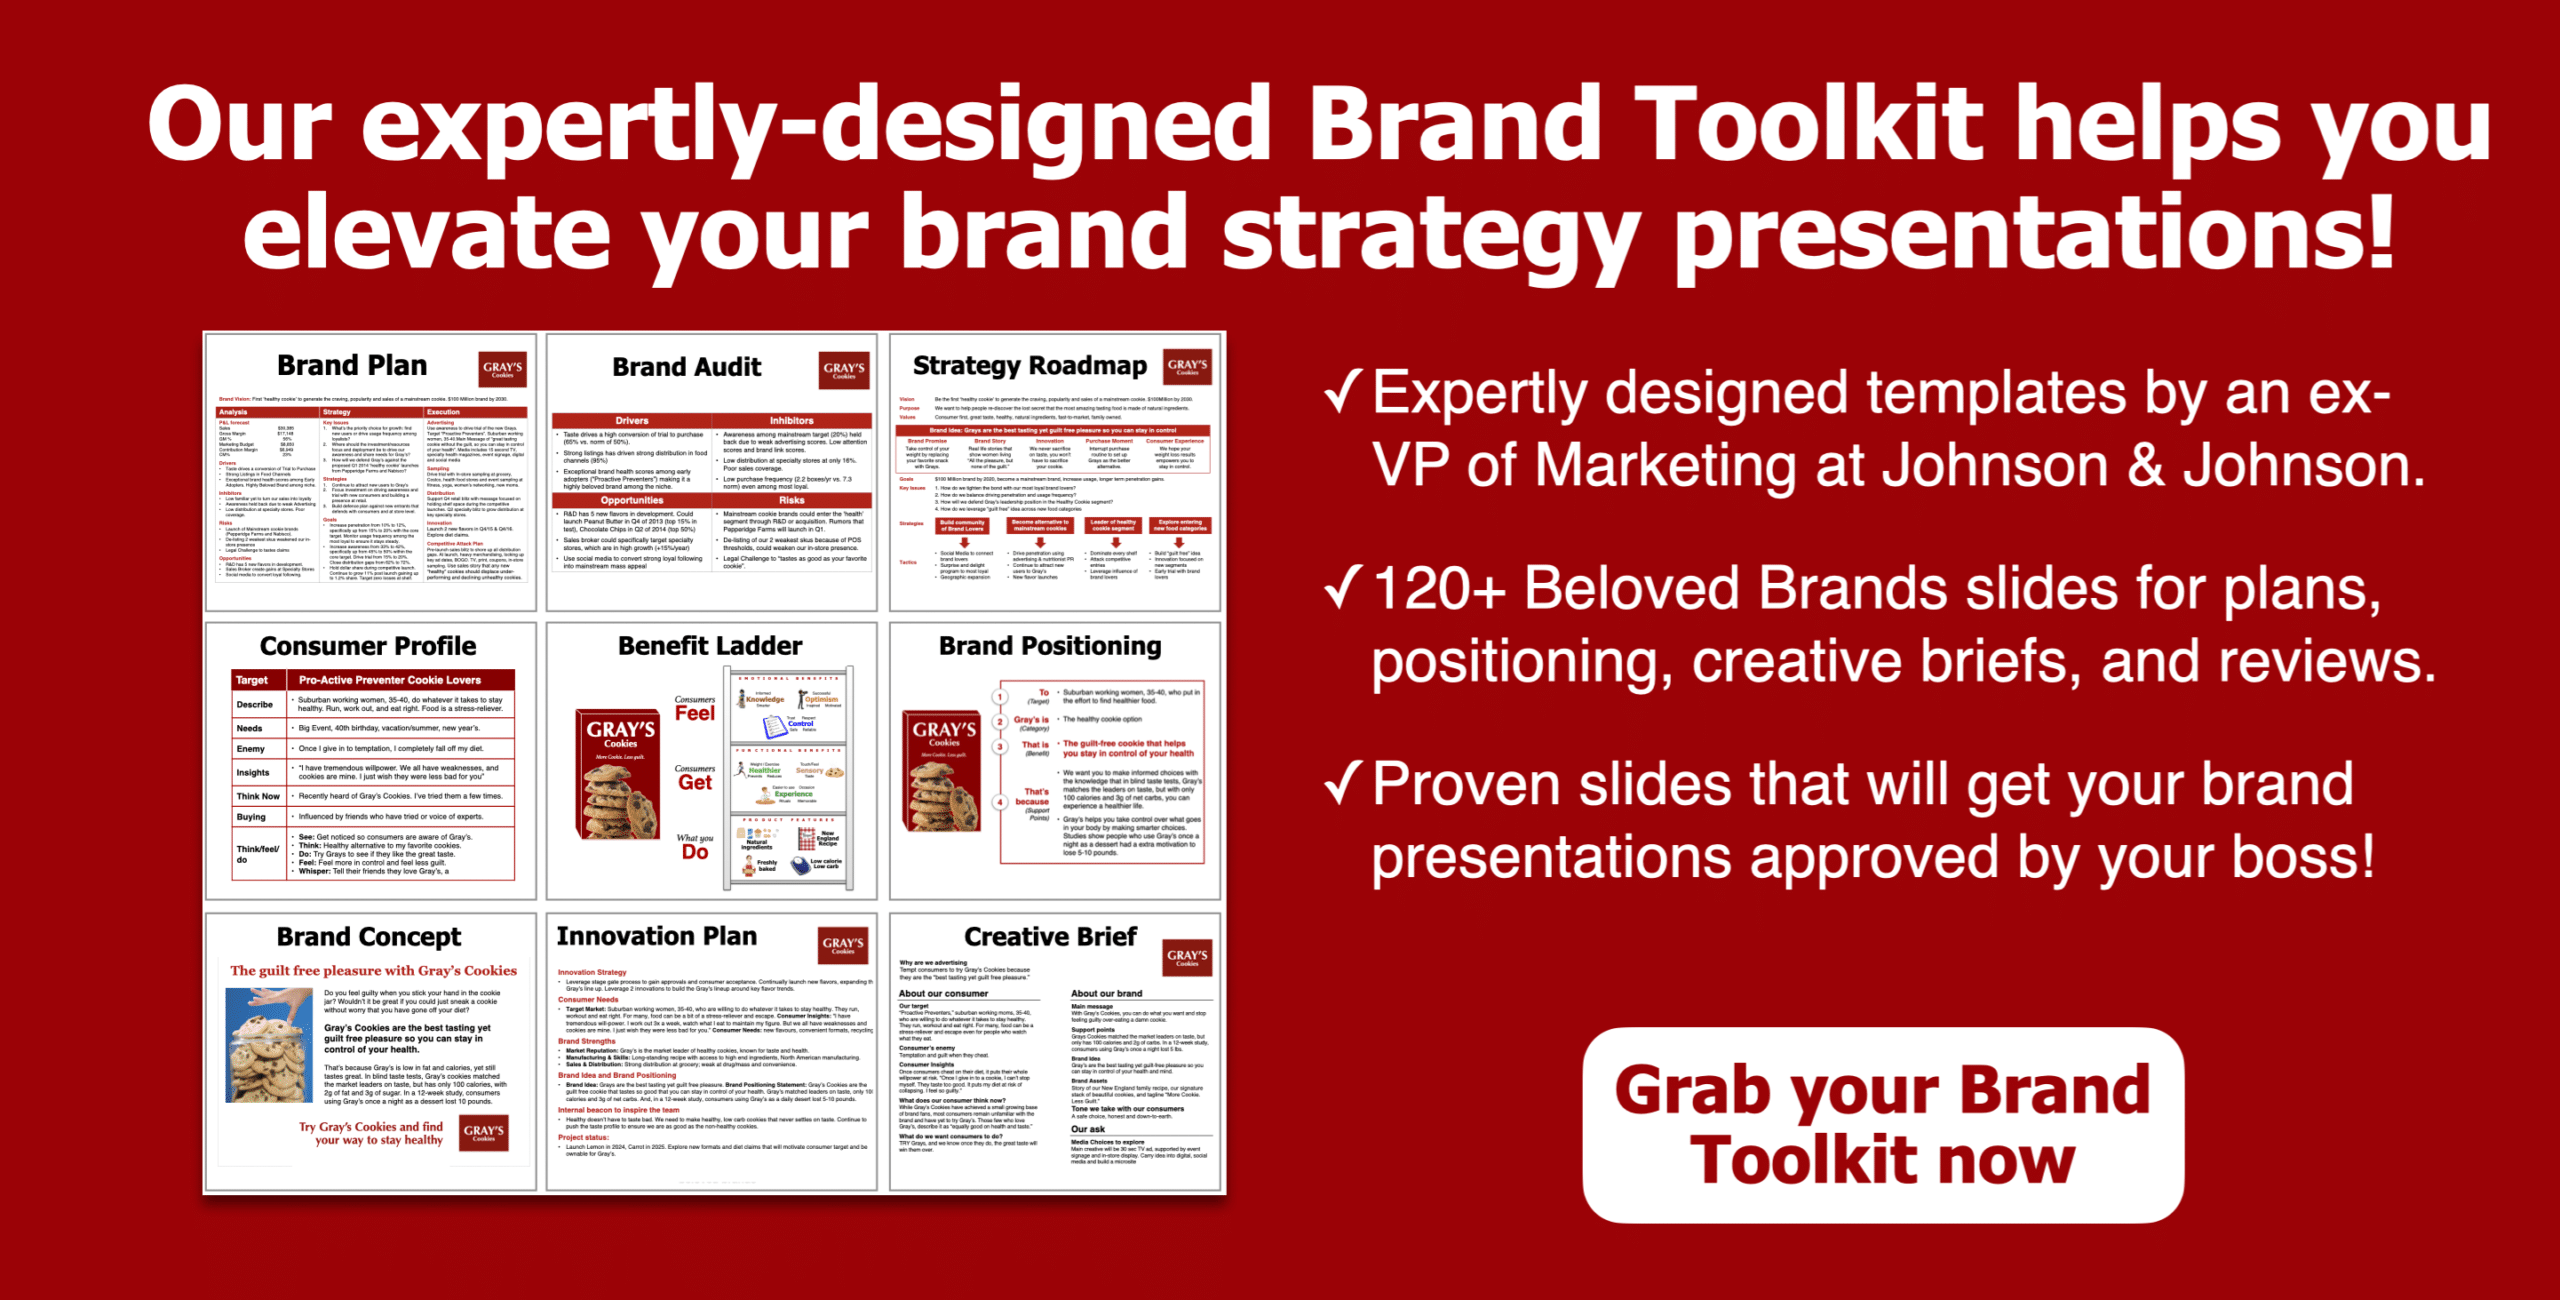 Brand Toolkit in red